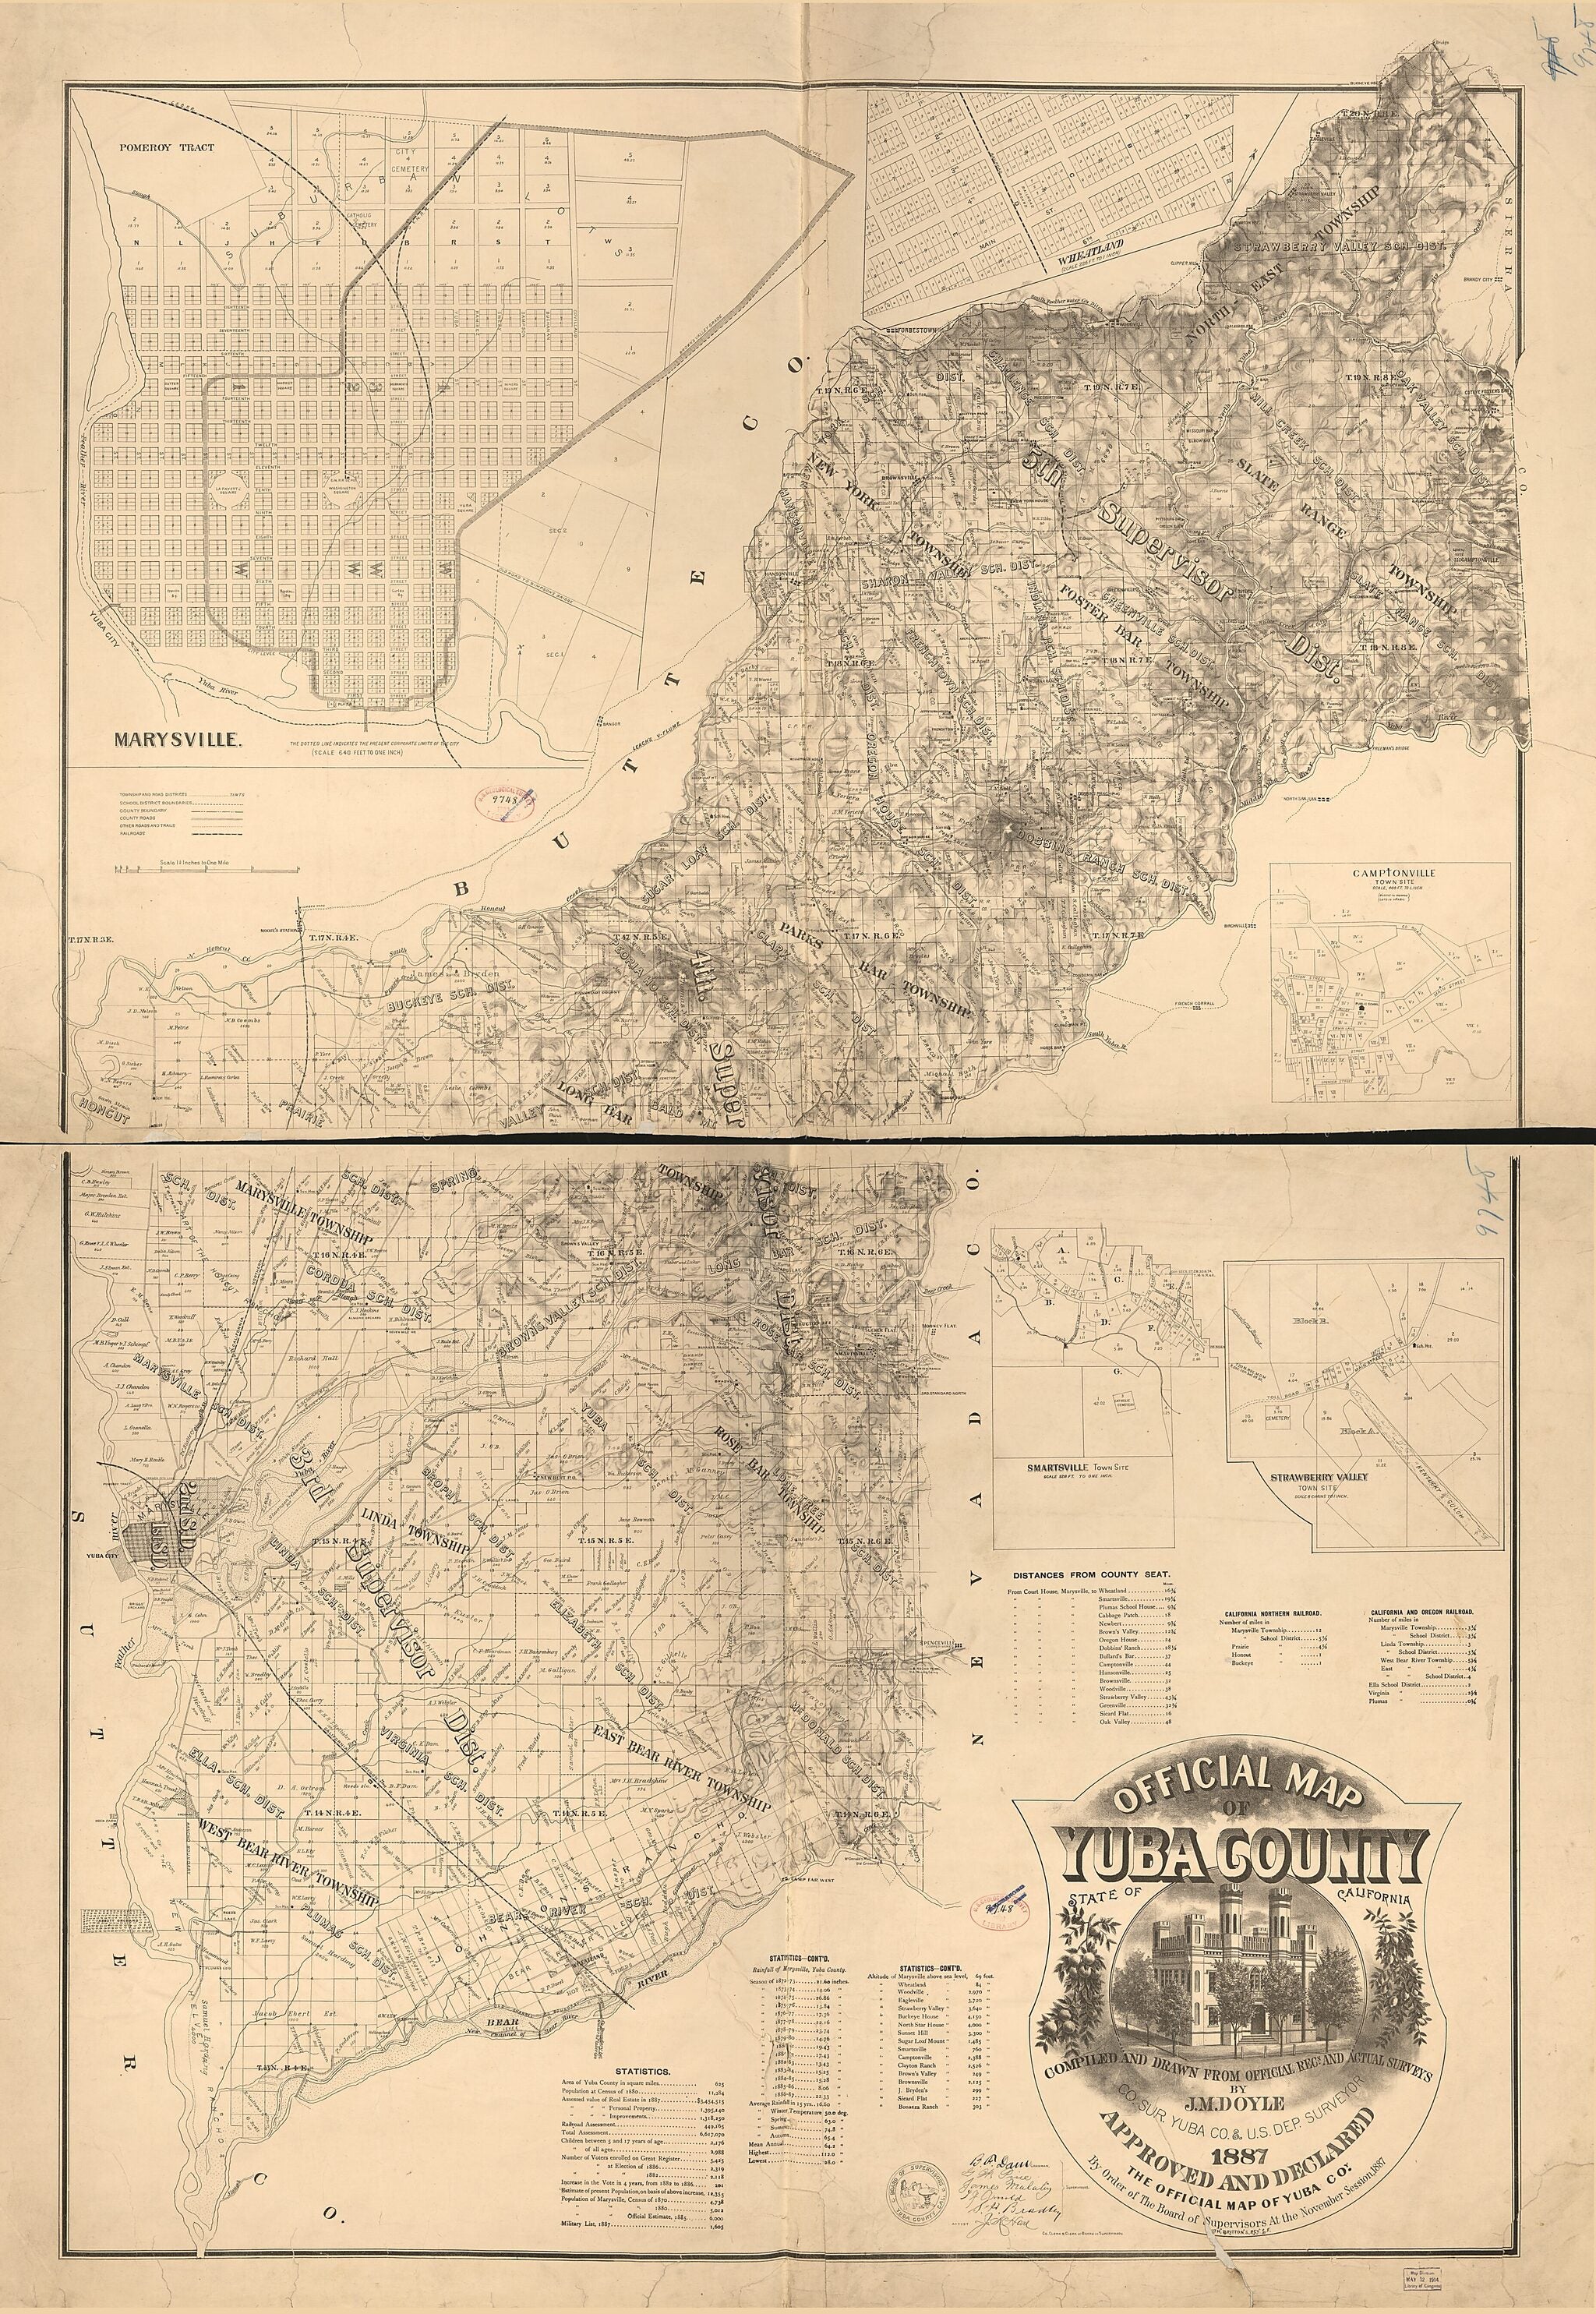 This old map of Official Map of Yuba County, State of California : Compiled and Drawn from Official Recs. and Actual Surveys from 1887 was created by  Britton &amp; Rey, J. M. Doyle in 1887